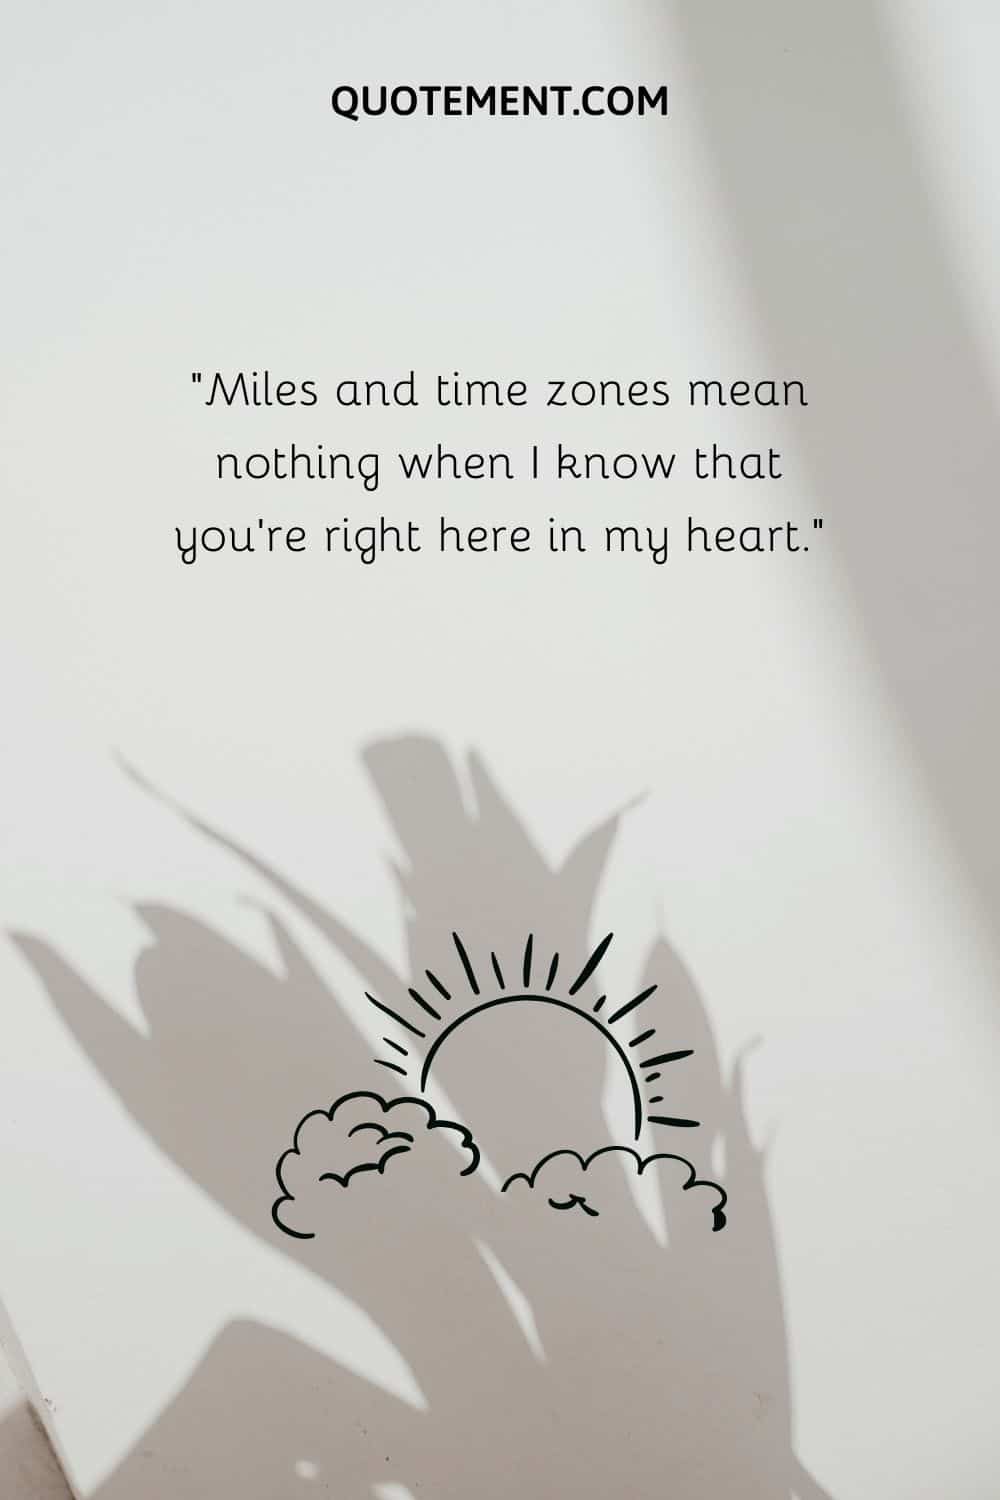 “Miles and time zones mean nothing when I know that you’re right here in my heart.”